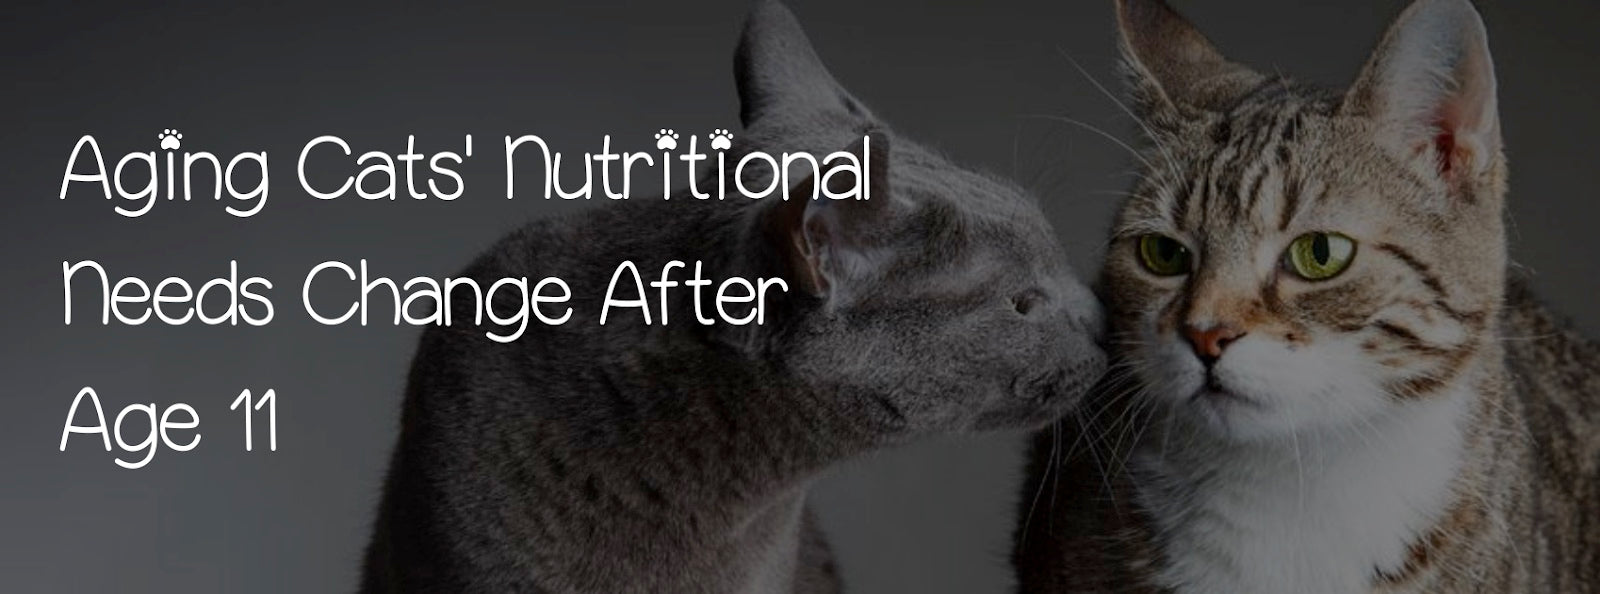 AGING CATS' NUTRITIONAL NEEDS CHANGE AFTER AGE 11